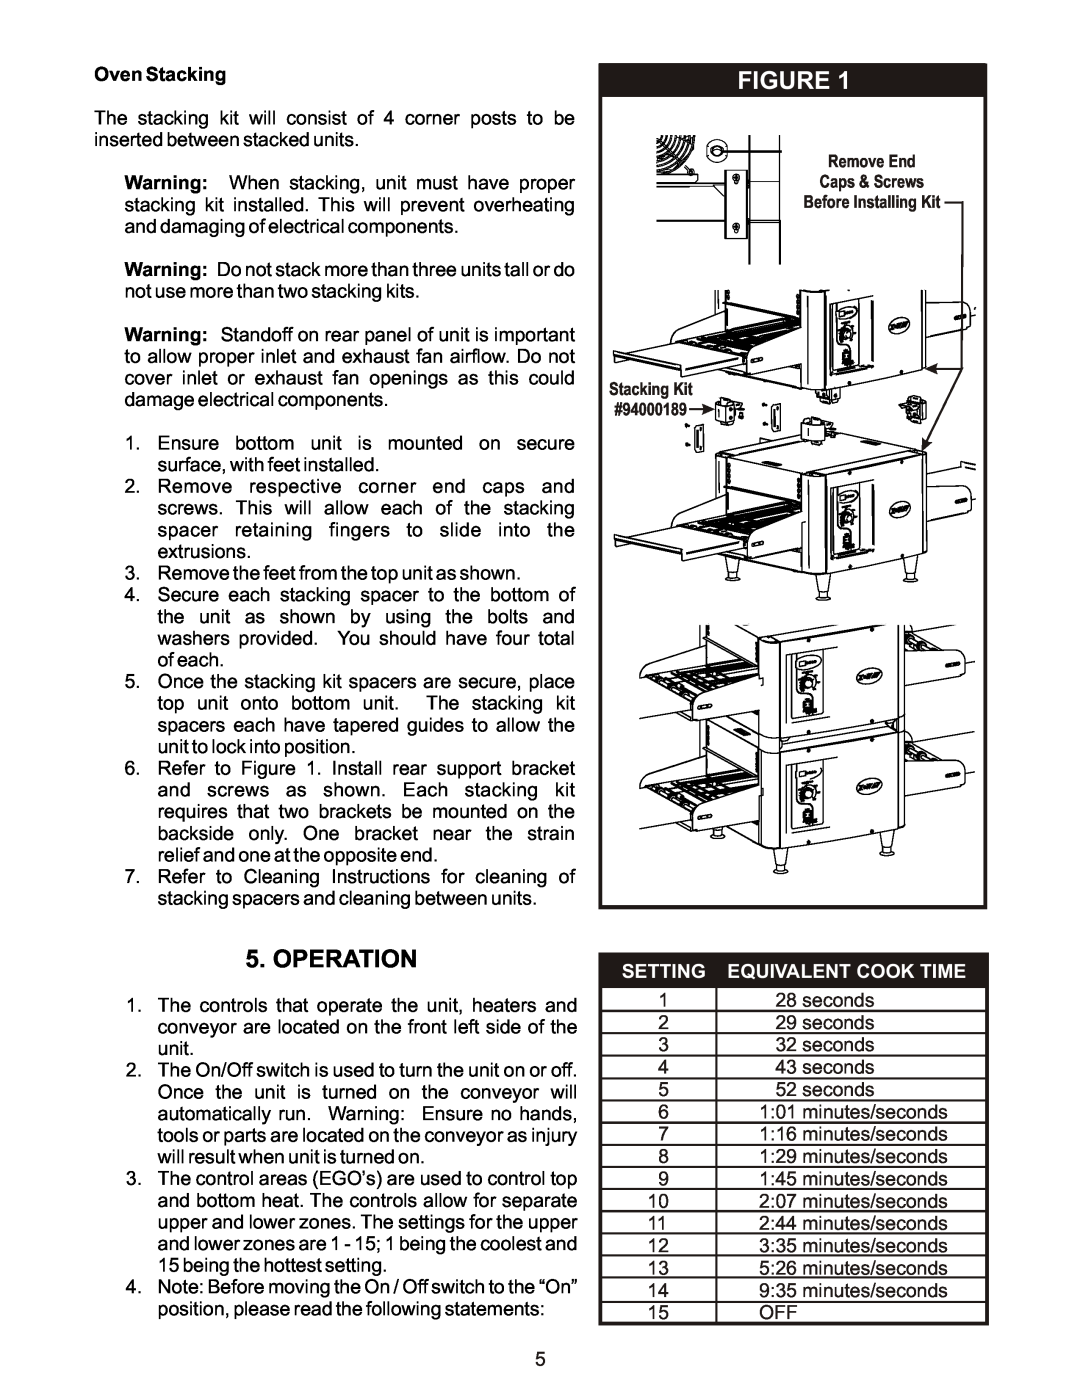 APW Wyott X*WAV 1417A operating instructions Operation, Setting, Equivalent Cook Time 